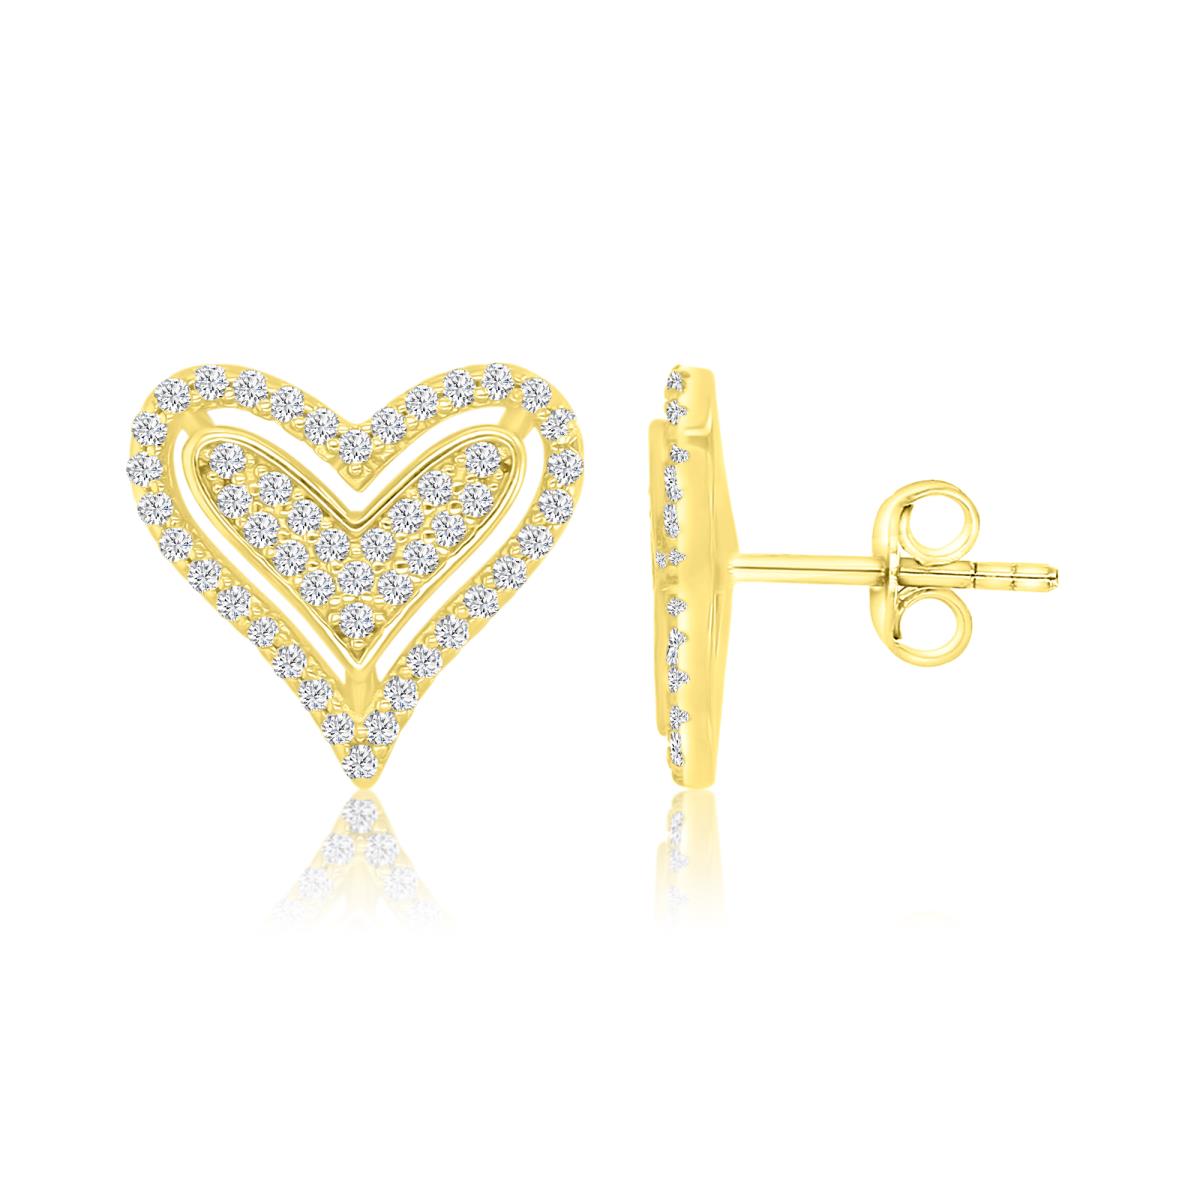 Sterling Silver Yellow 1M 12x13mm White CZ Pave Heart Stud Earrings